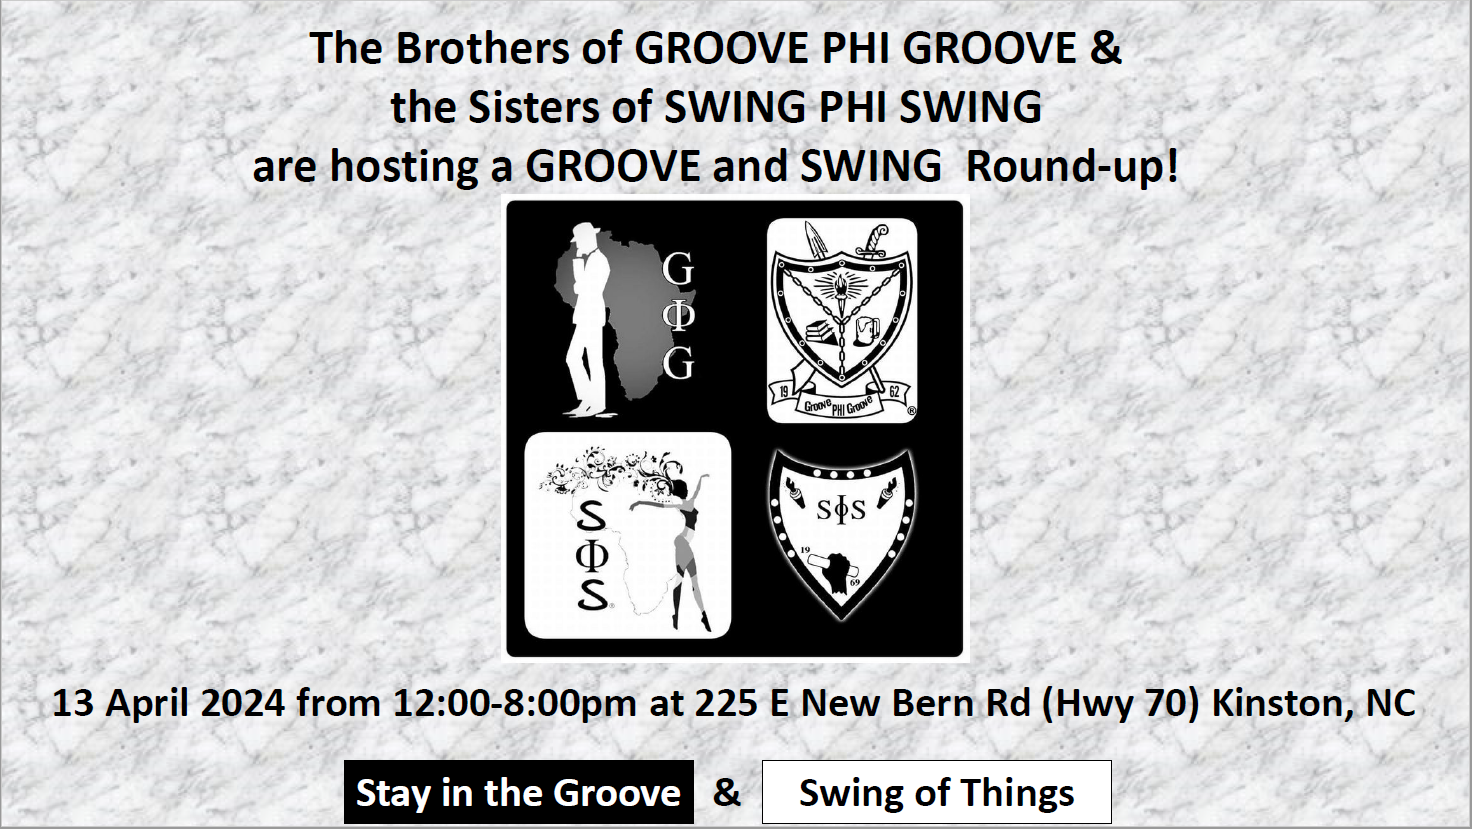 Groove Phi Groove / Swing Phi Swing Round-Up